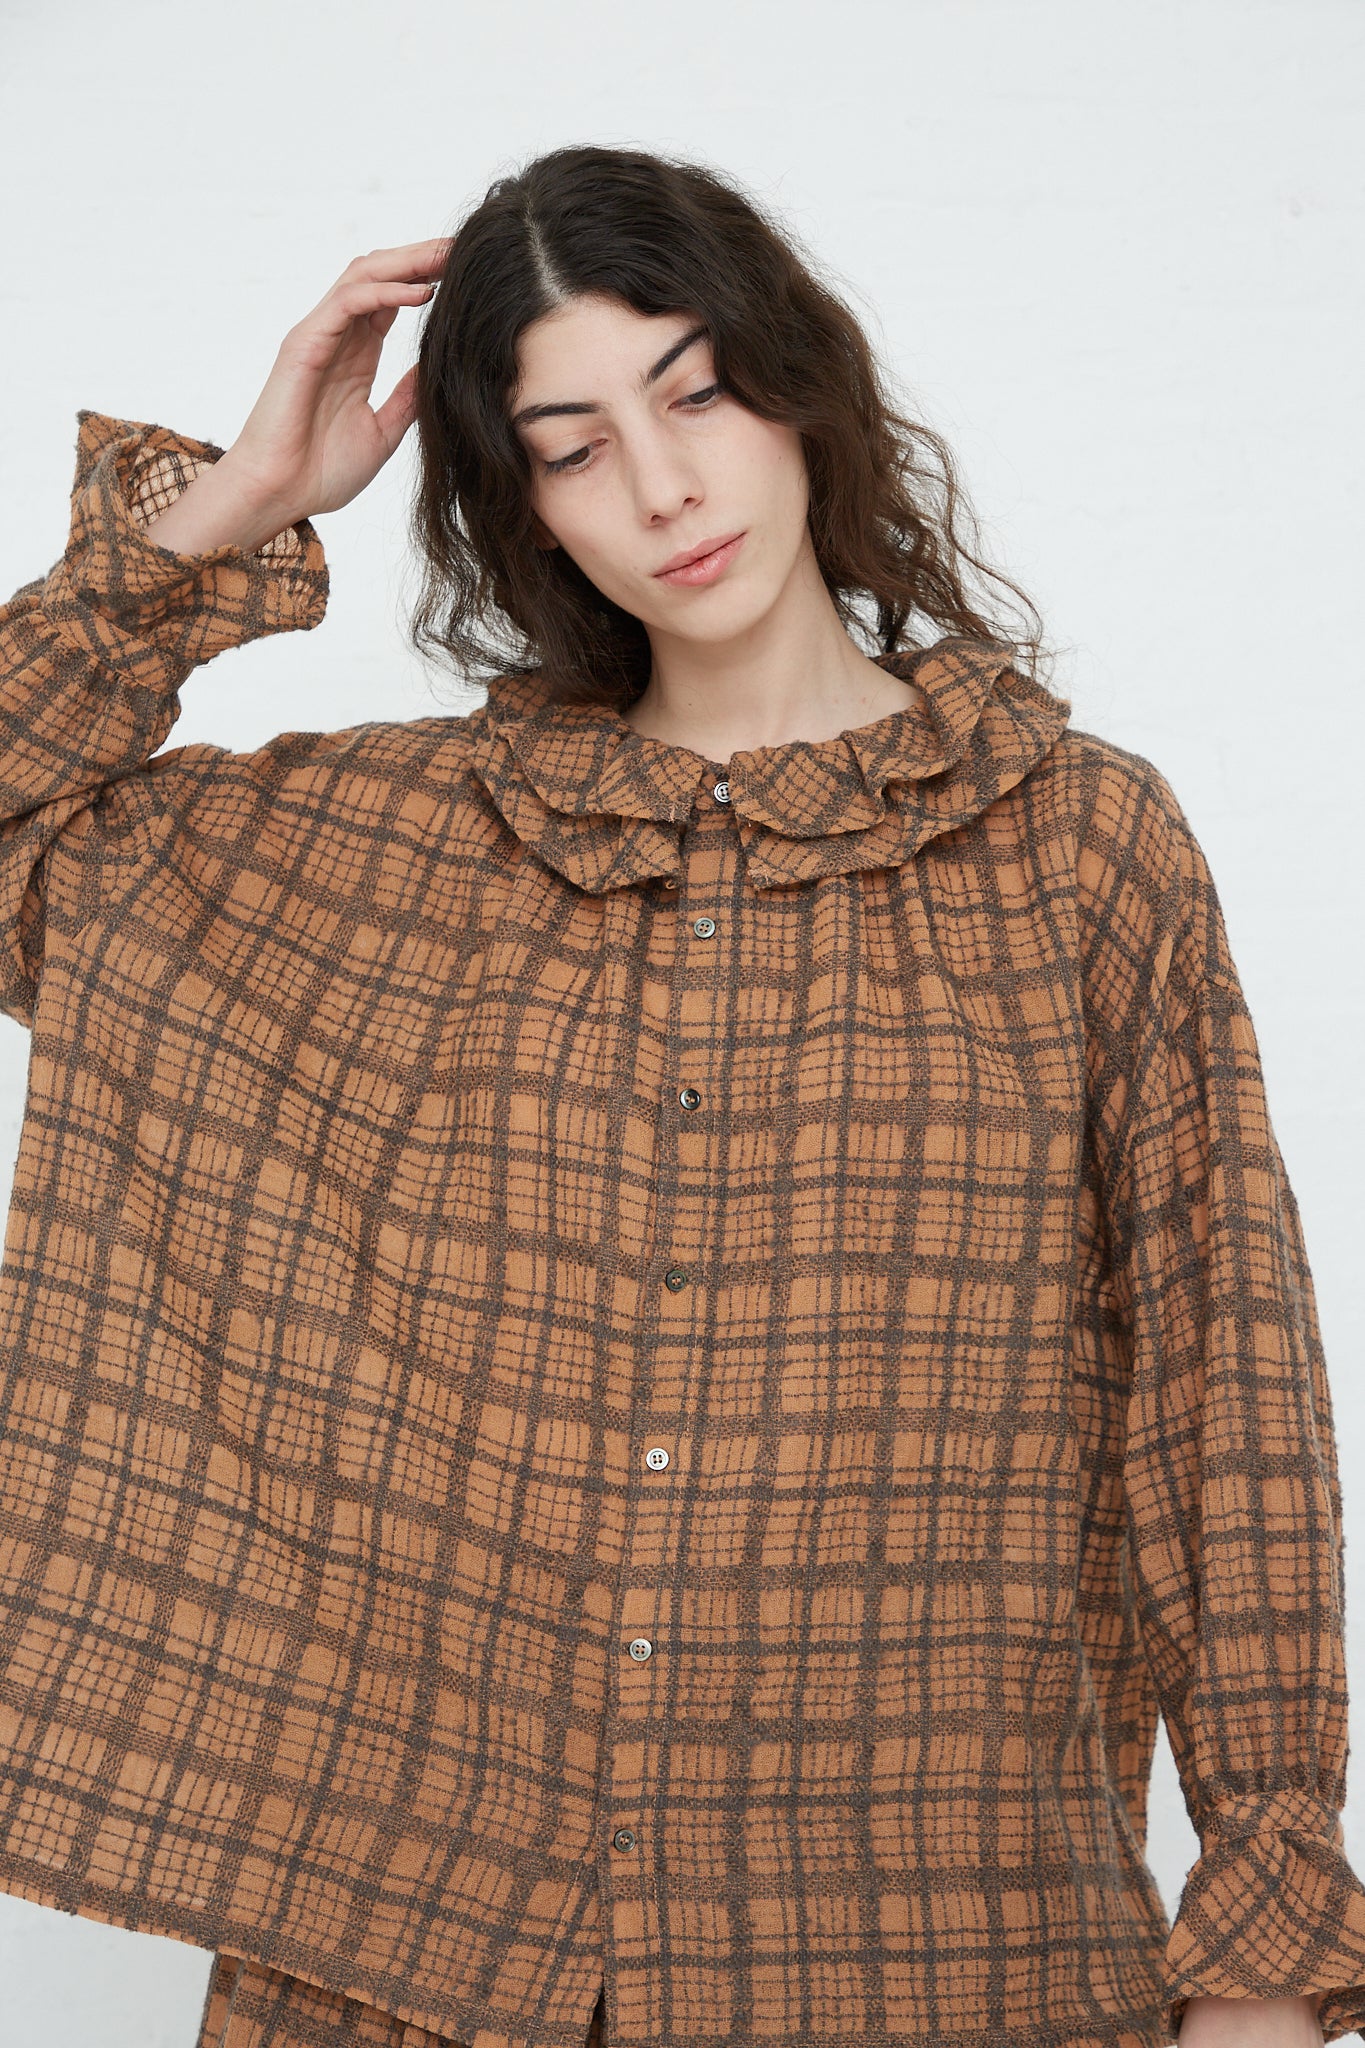 The model is wearing a Ichi Antiquités Wool Check Frill Blouse in Terracotta.